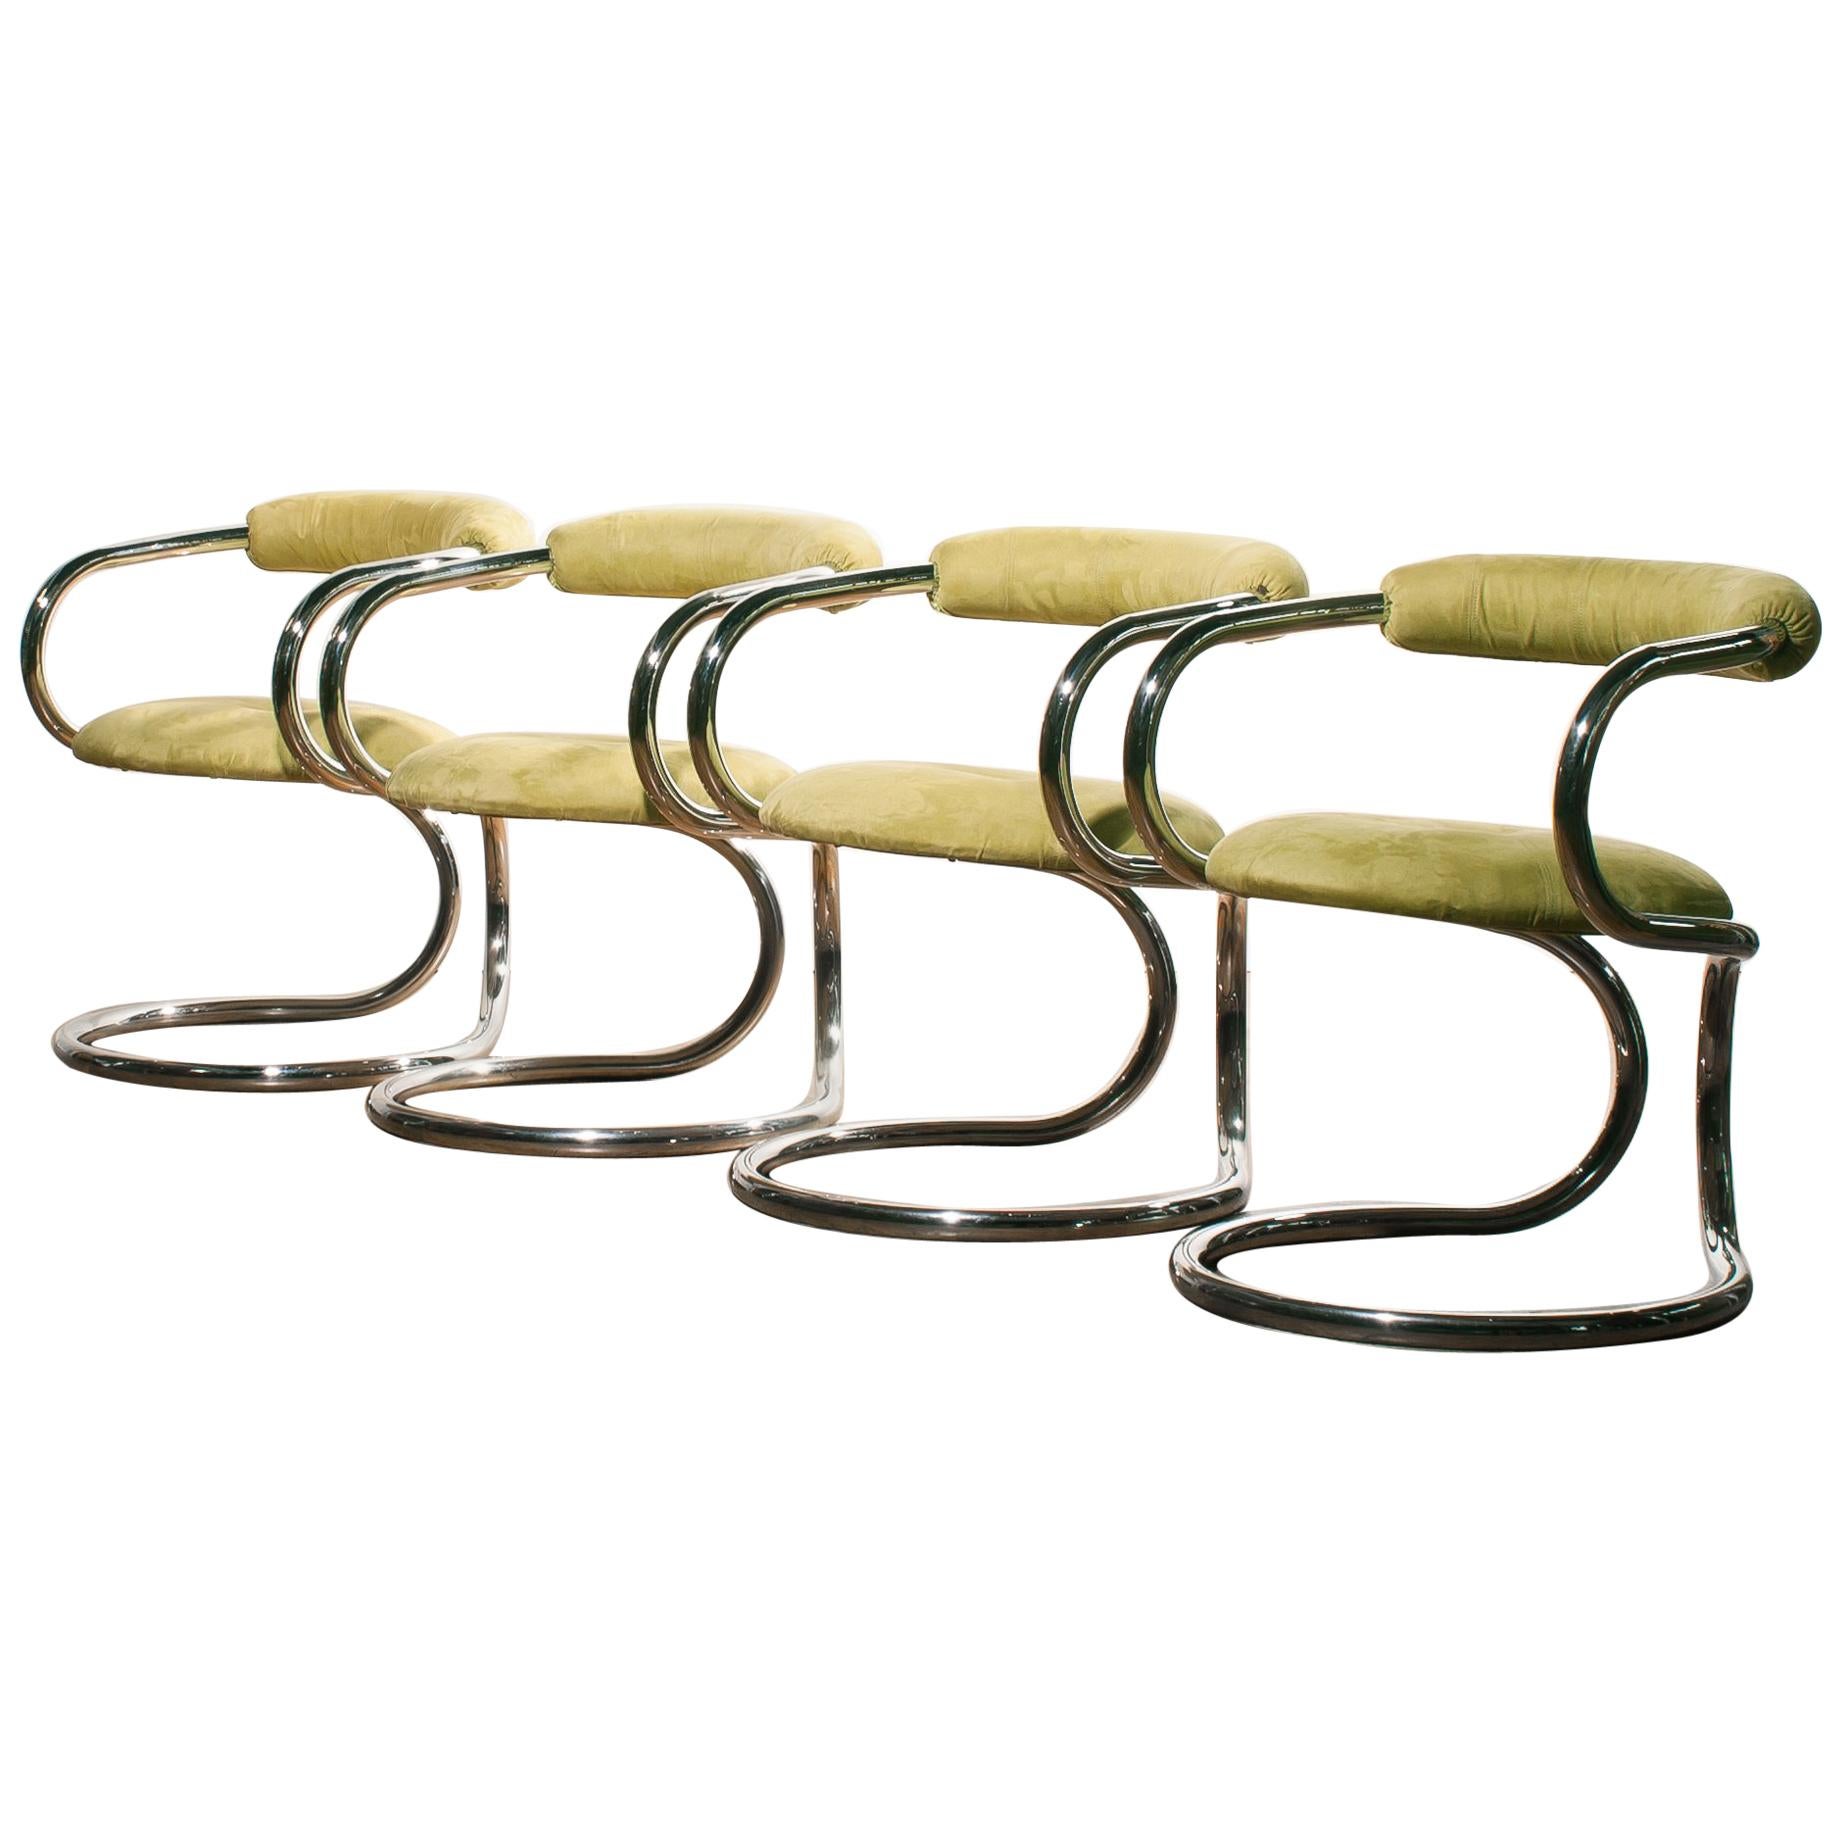 1970s, Chrome Tubular Set of Four Dining Chairs by Tecnosalotto, Italy